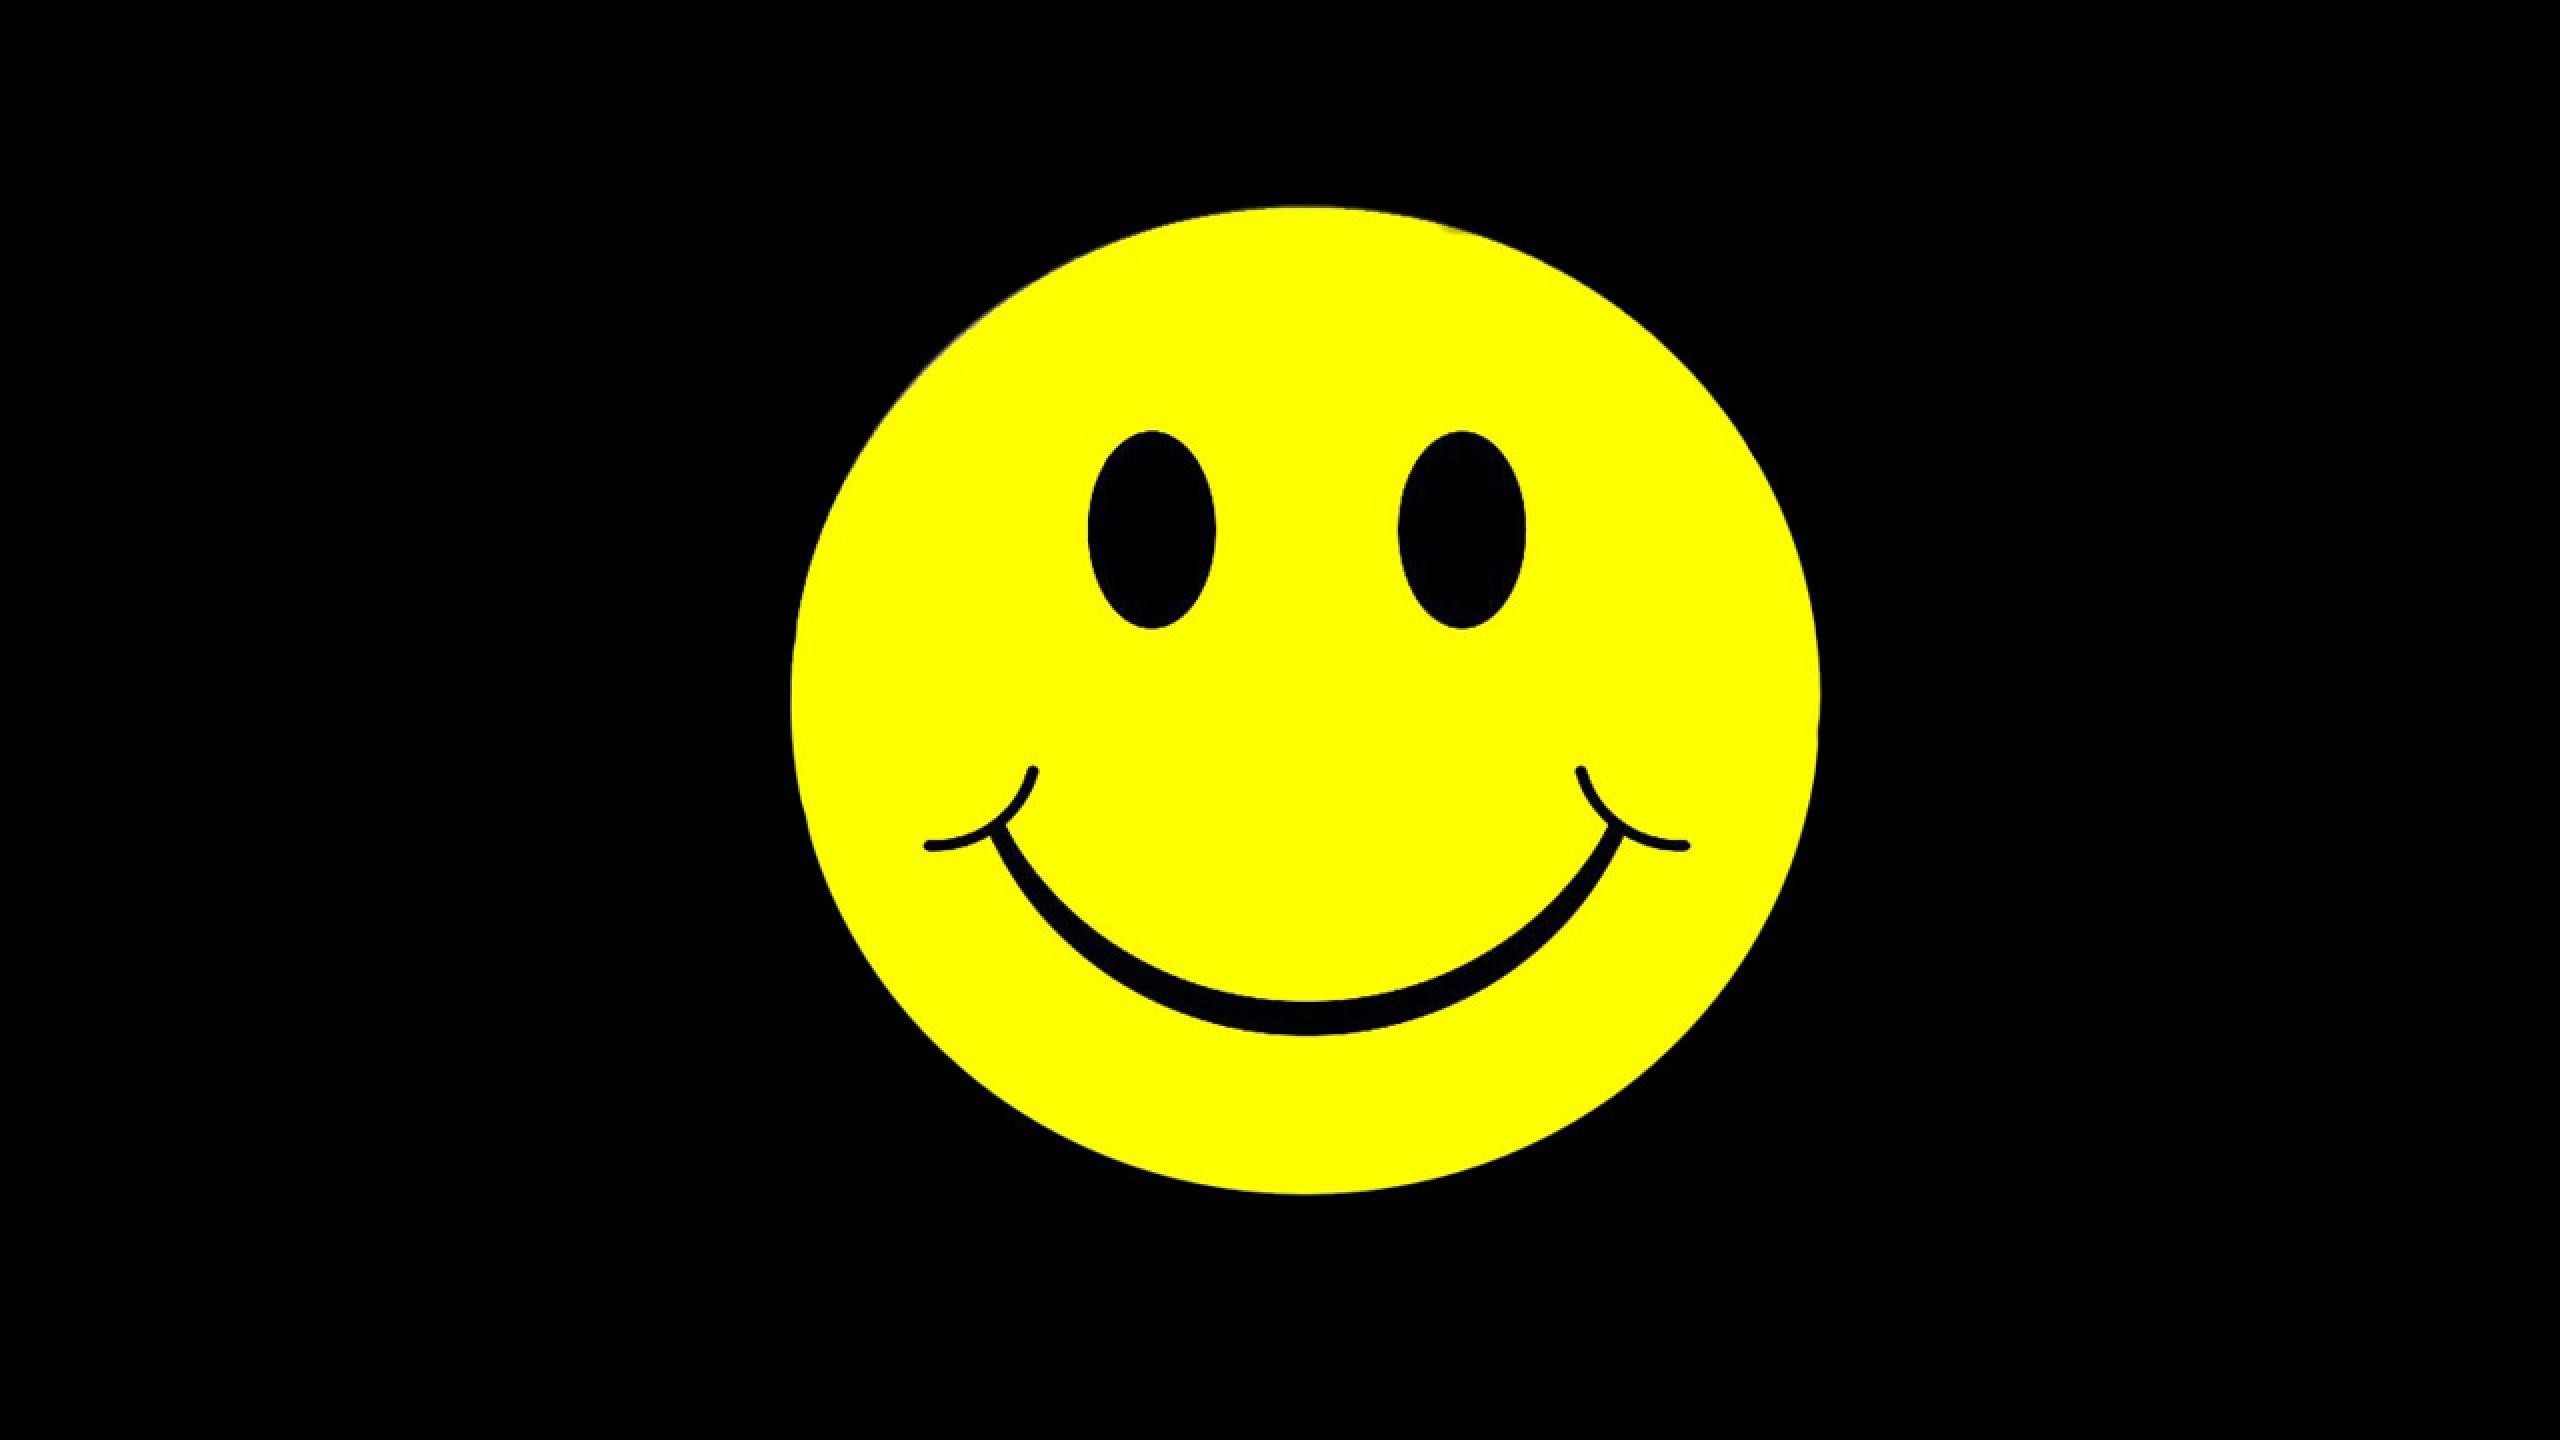 2560x1440 Smiley Face Background â¤ 4K HD Desktop Wallpaper for 4K Ultra HD